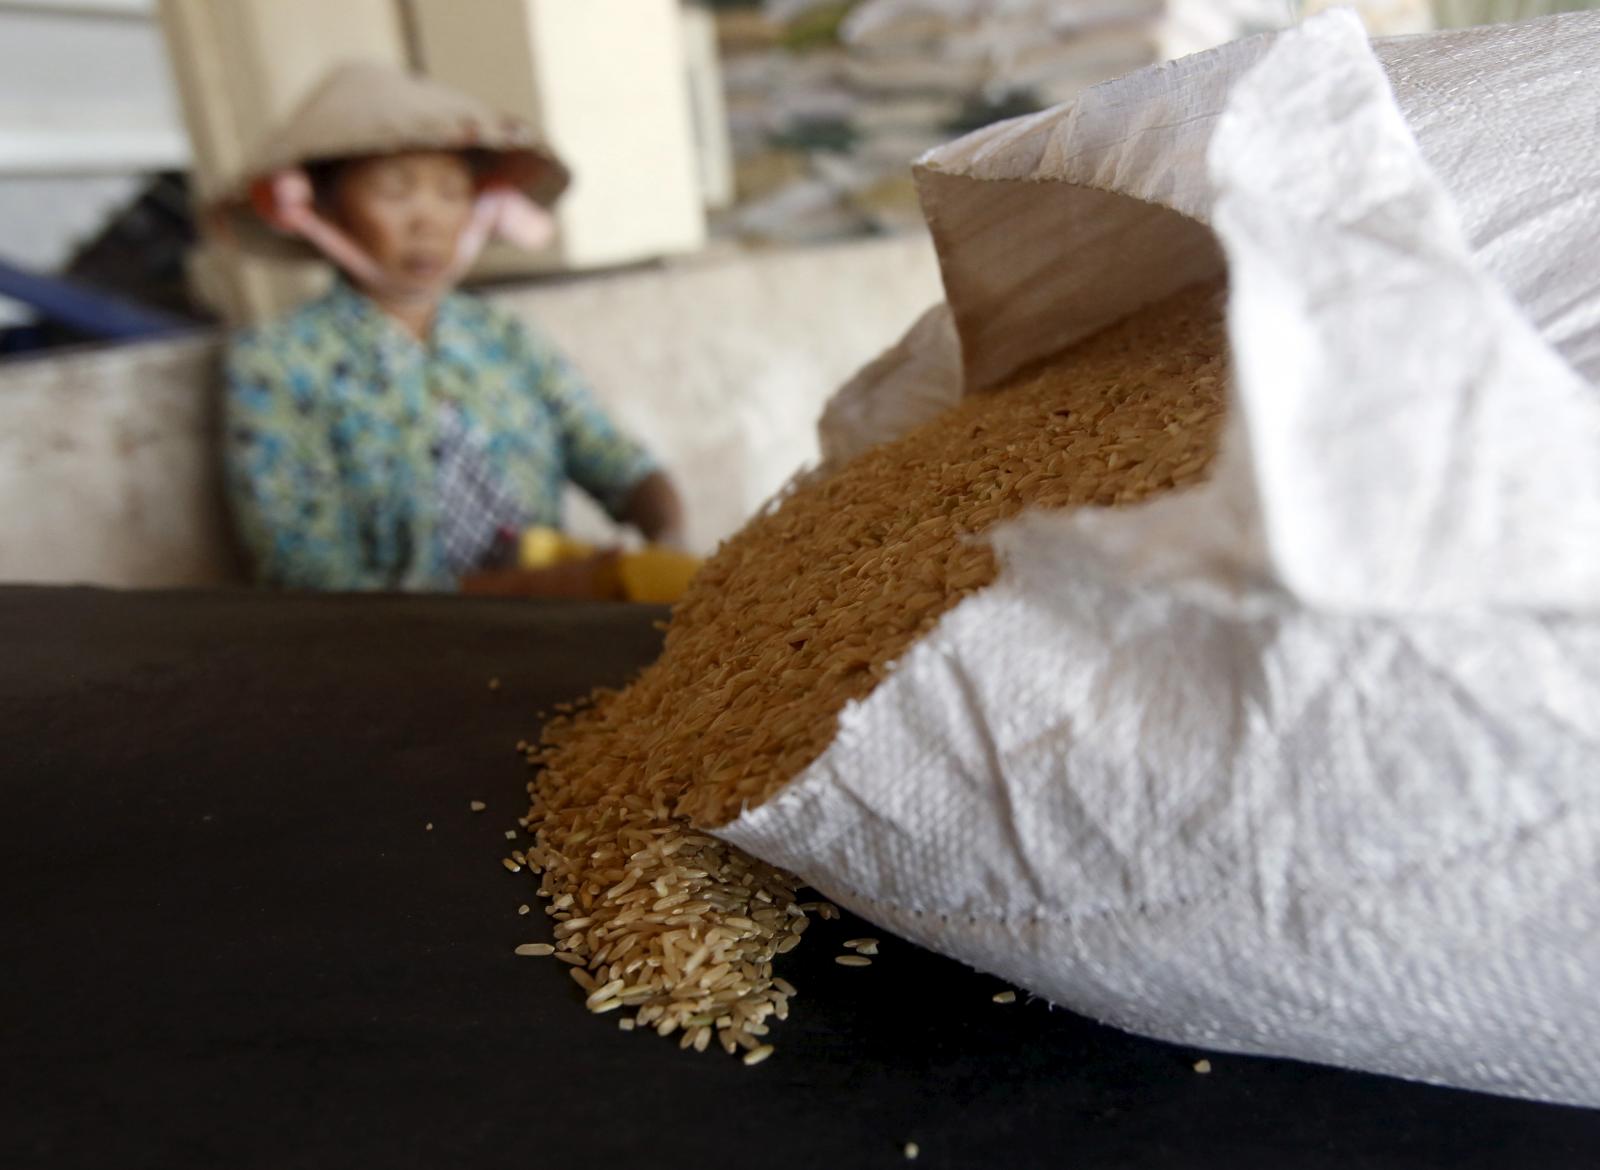 Philippines set to import 1.2 mln T of rice as caps removed